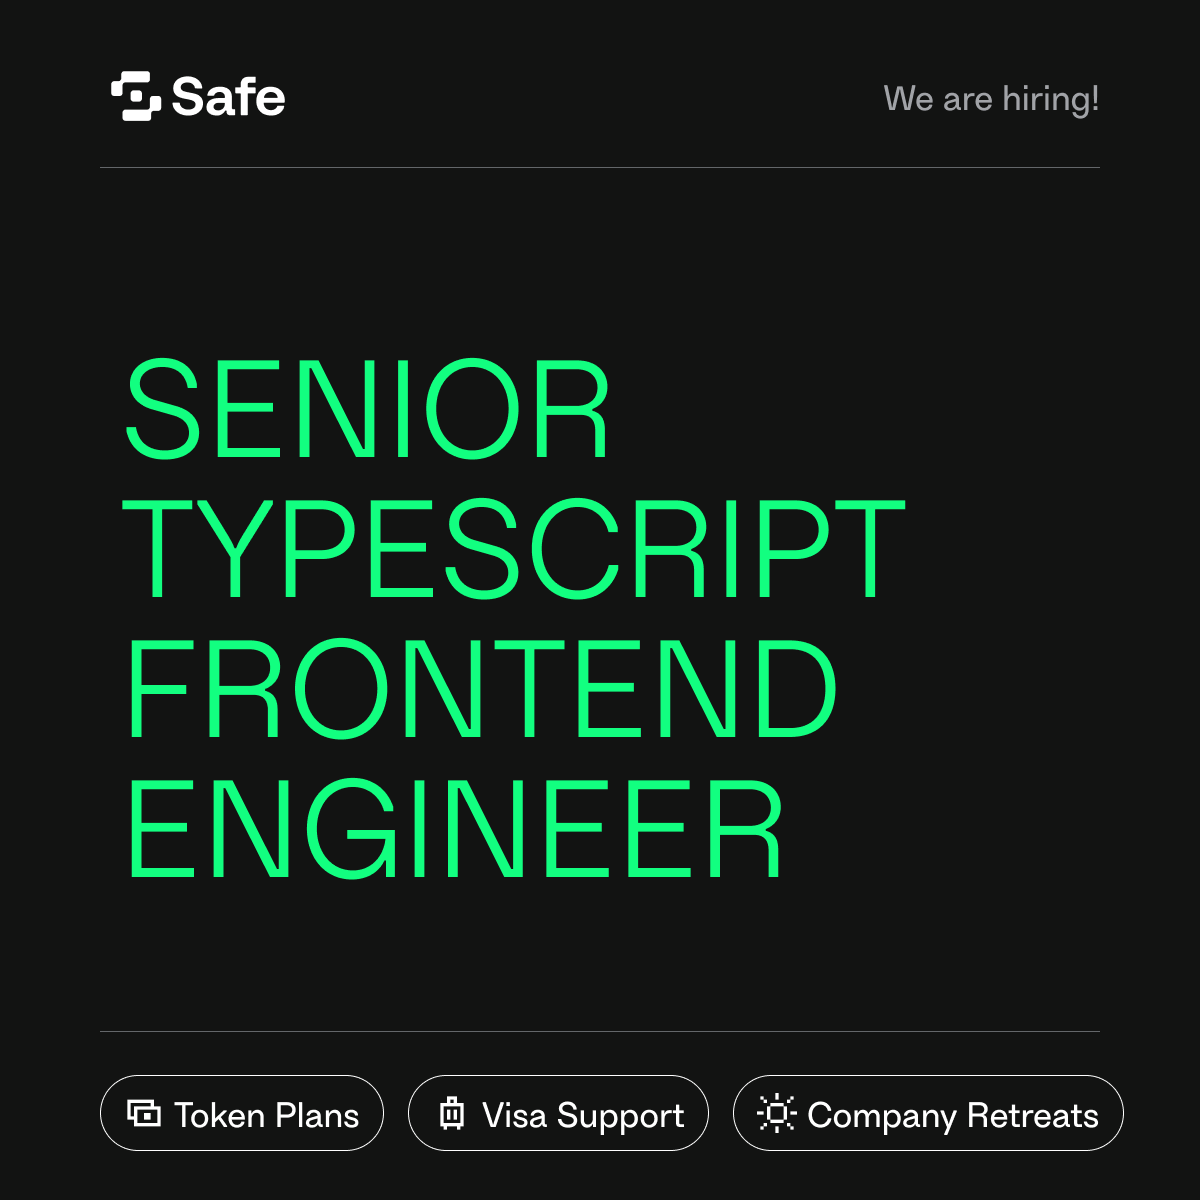 We are hiring! New roles have opened up at @Safe 👀 Come join the team and shape the future of Ownership with us 🟢 View all open roles here: safe.global/careers#positi…